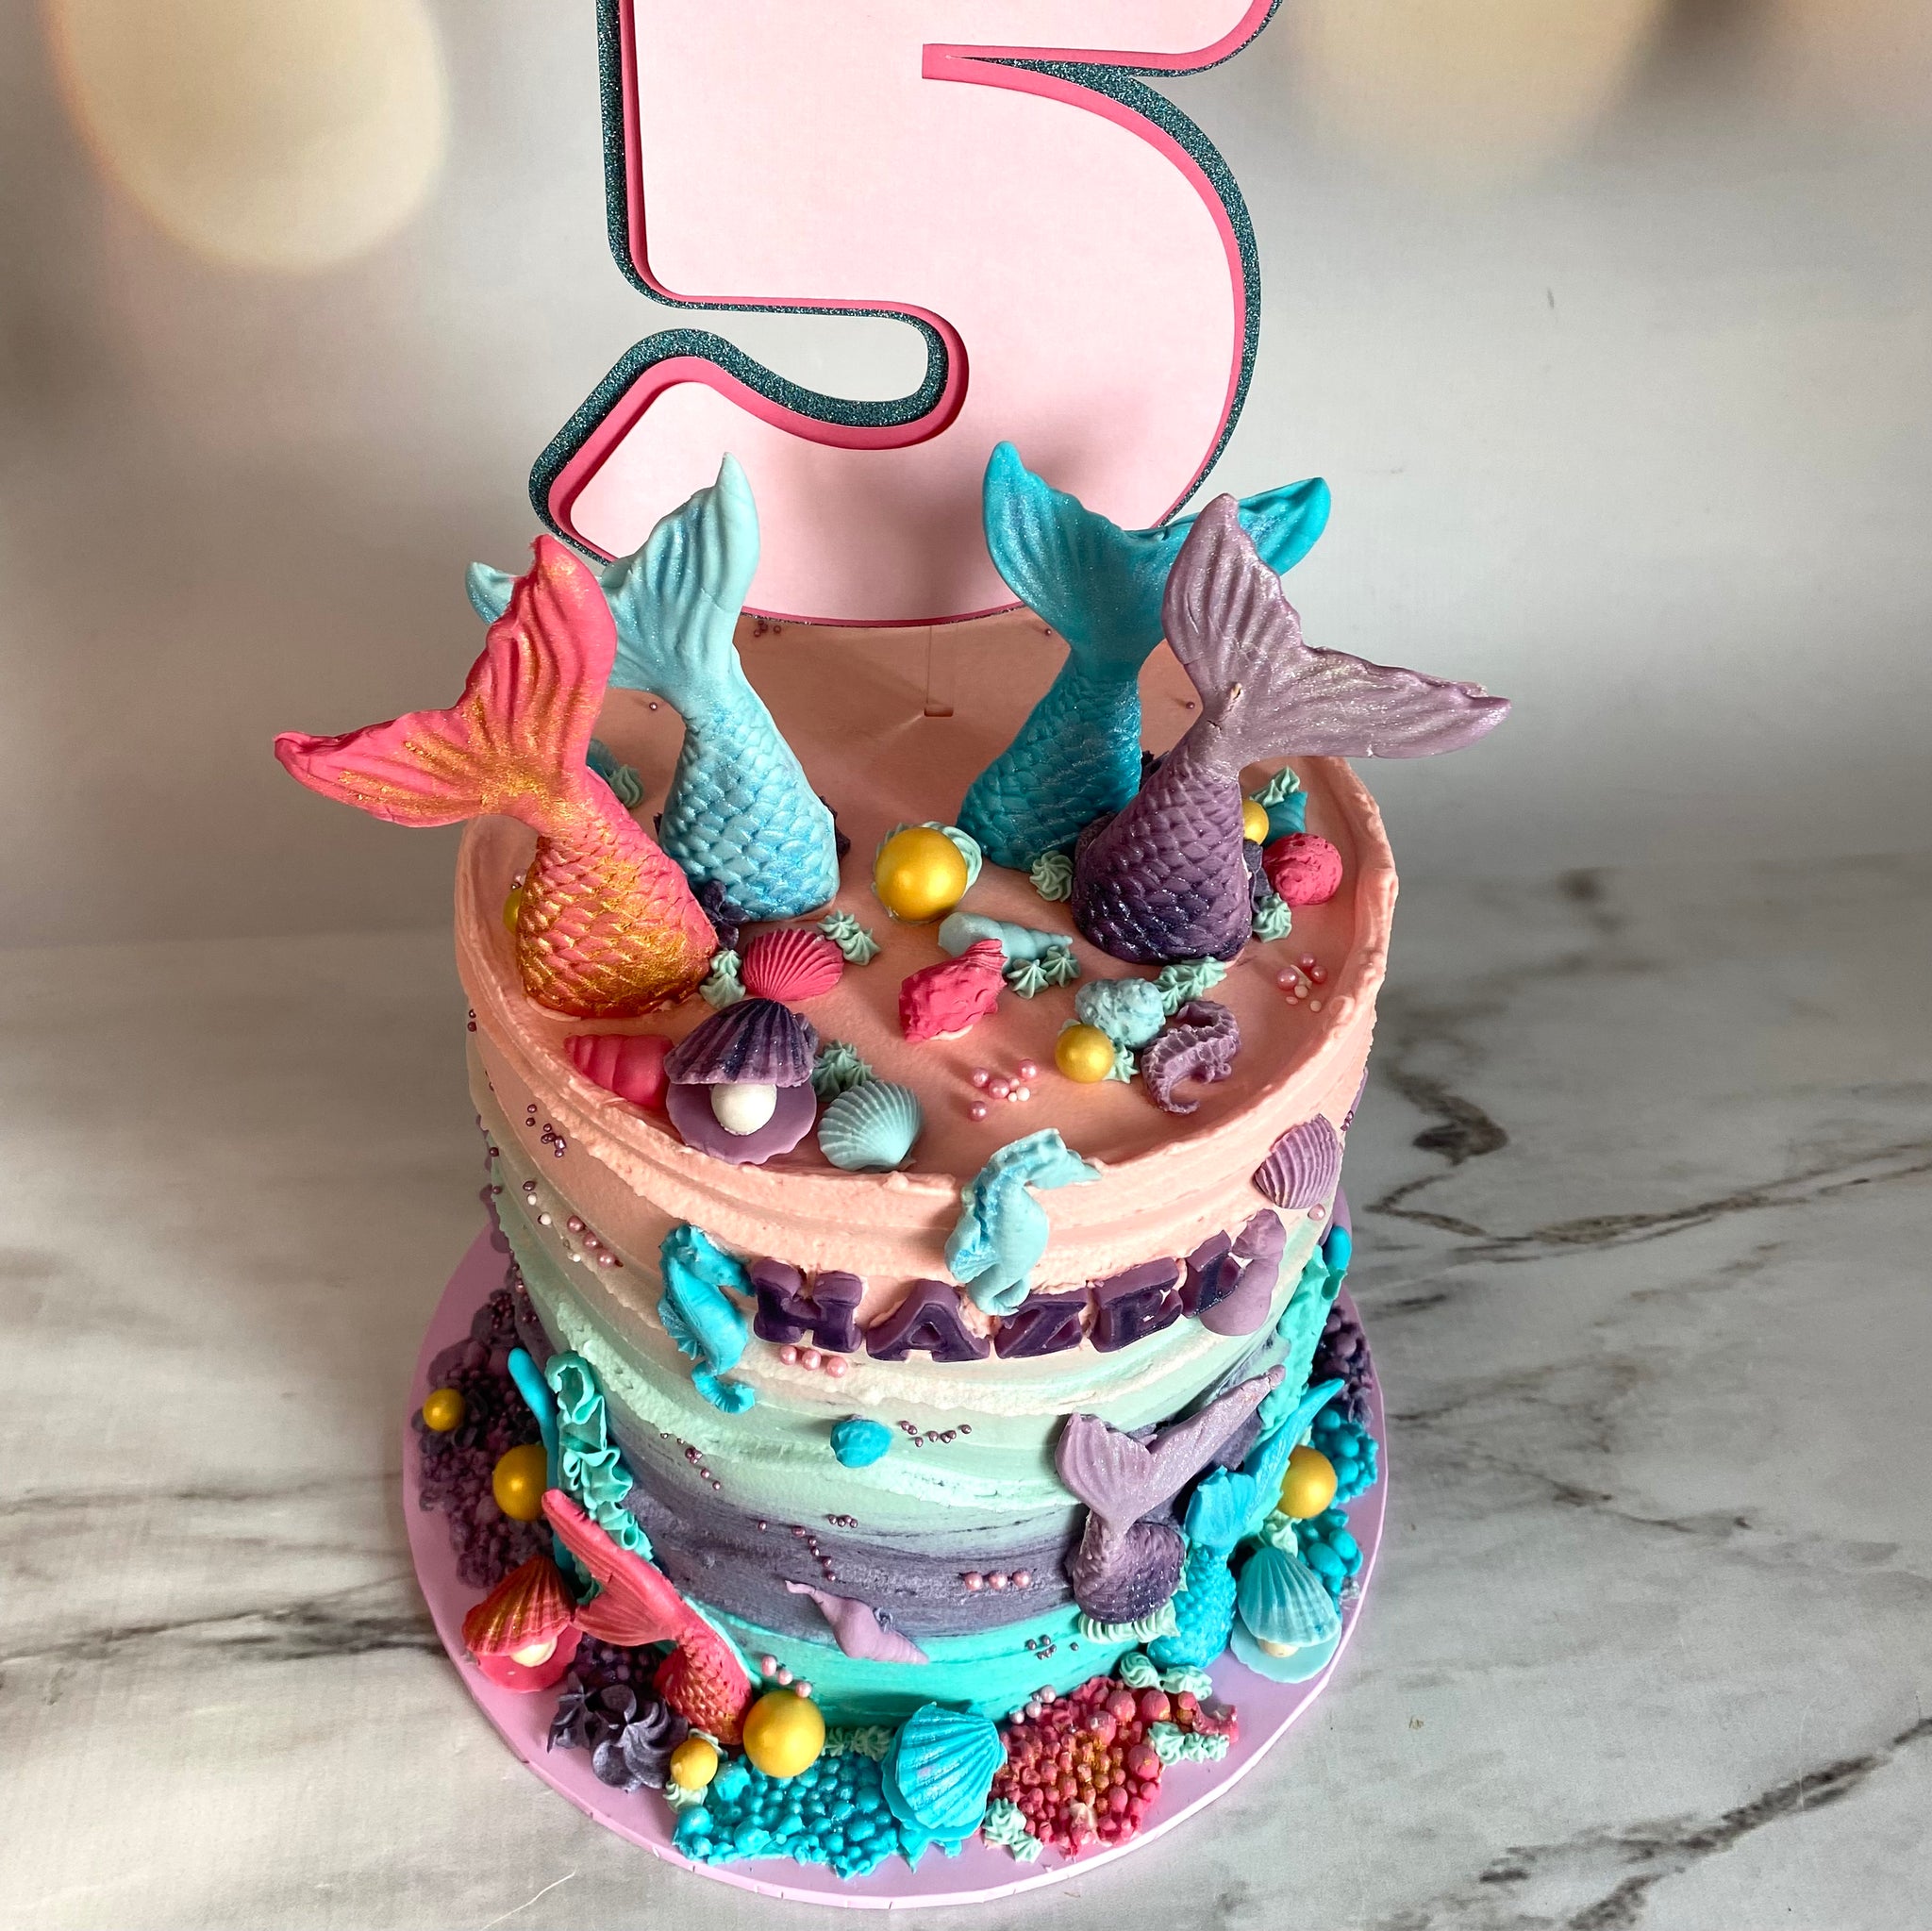 Mermaid Tails Cake | Happy Birthday Cakes for Girls Delivery KL/PJ